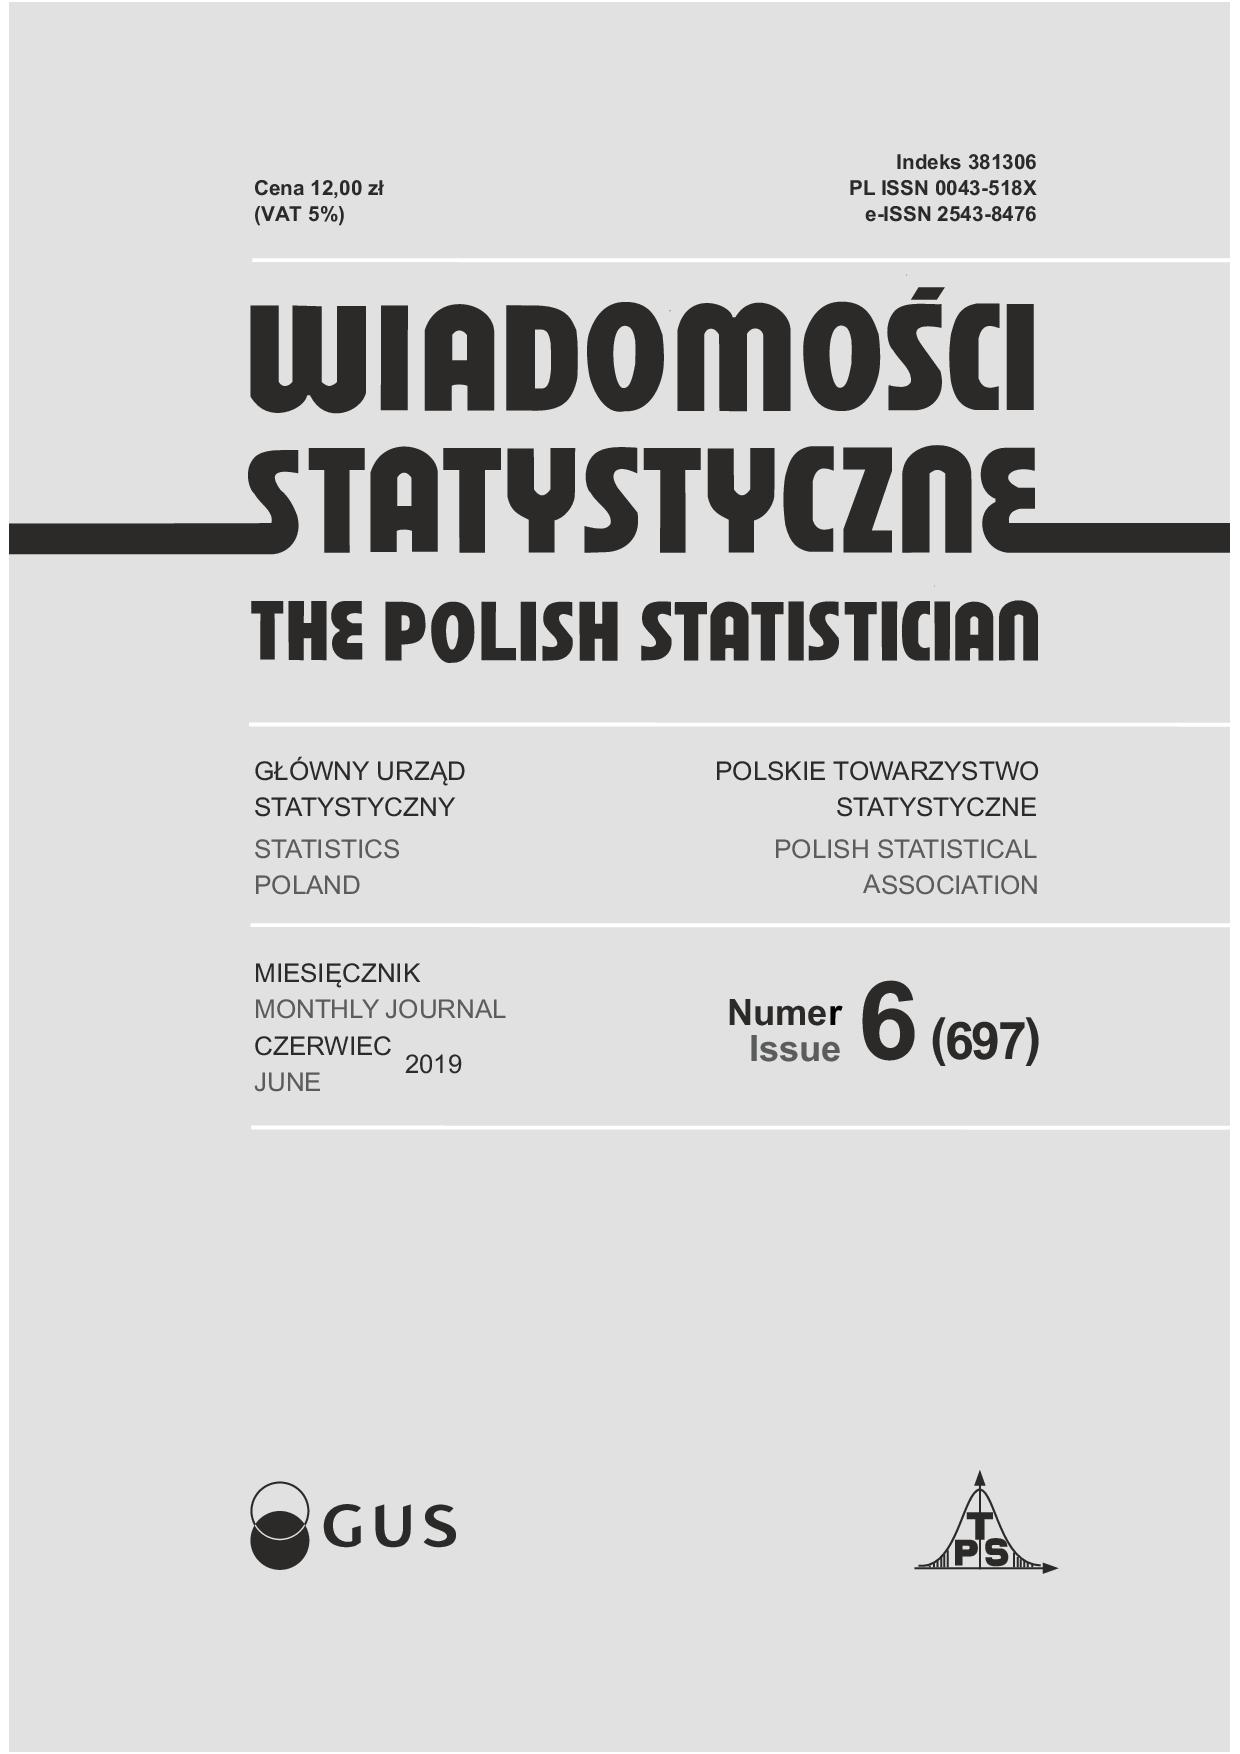 Does official statistics influence economic growth of a country? Cover Image